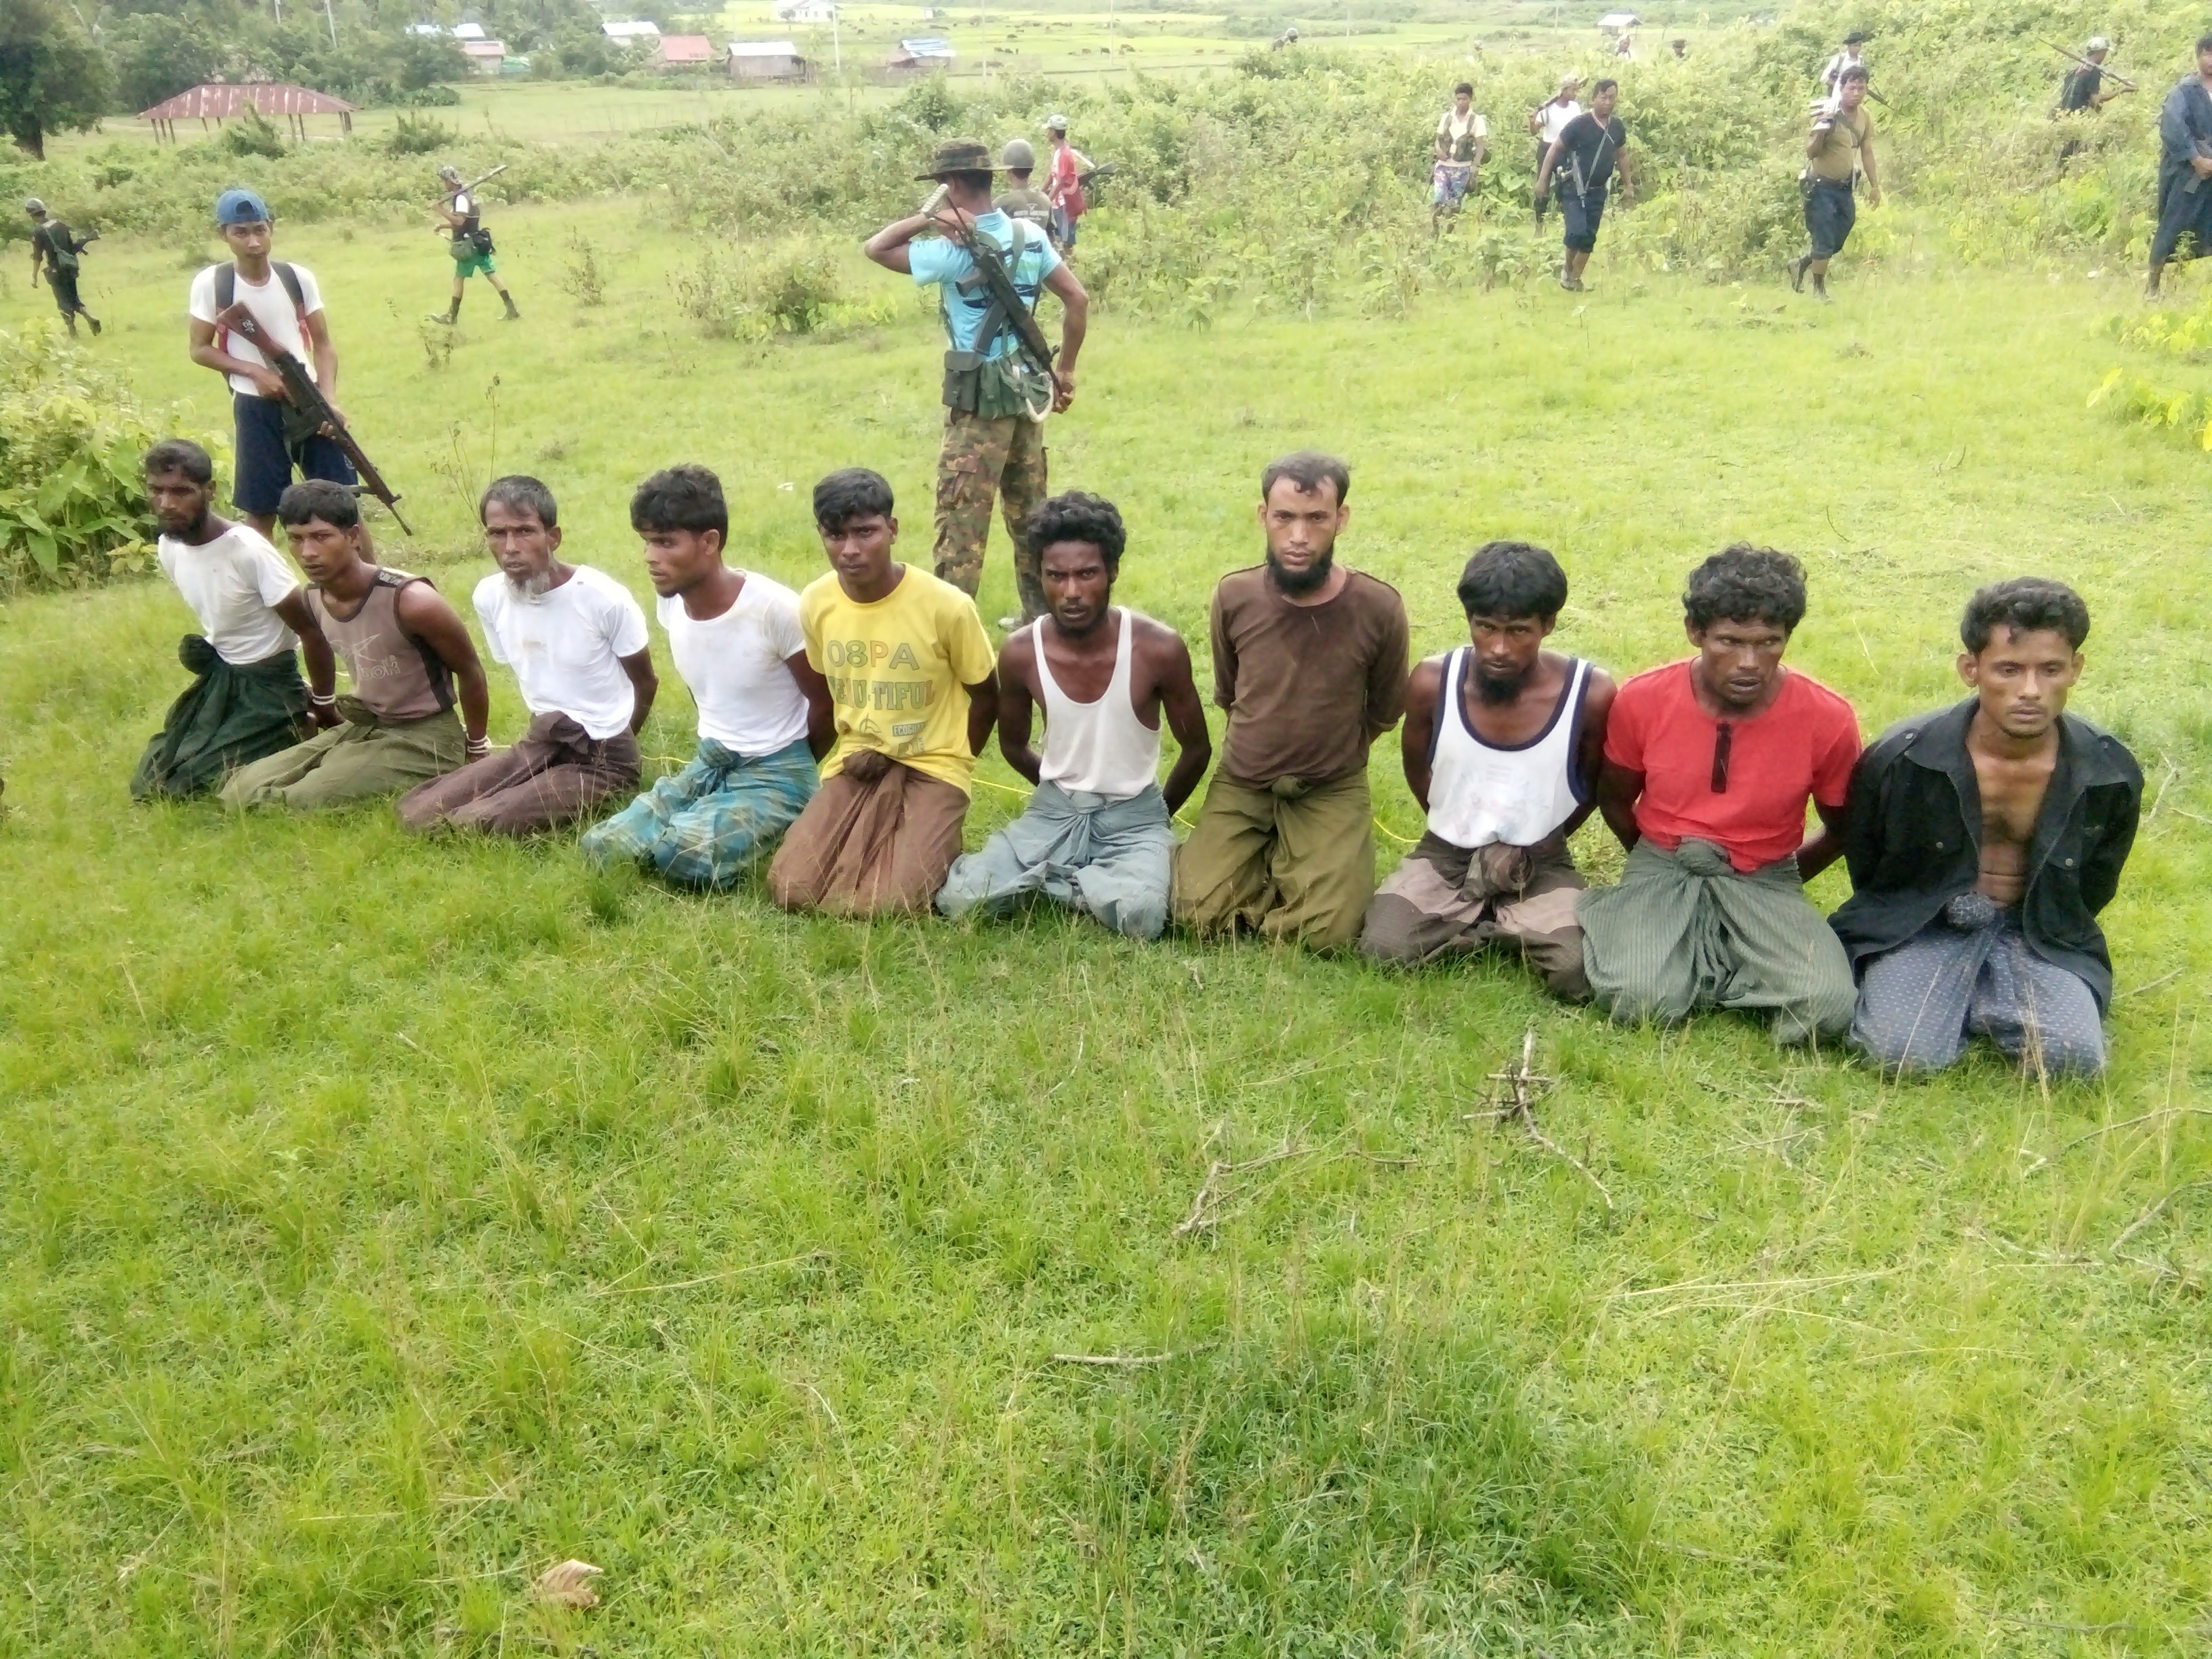 Ten Rohingya Muslim men and boys kneeling in a field in a Rakhine village last year. They were later found dead in a mass grave. Reuters reporters Wa Lone and Kyaw Soe Oo have been sentenced to seven years in jail, after investigating the killing. Photo: Reuters